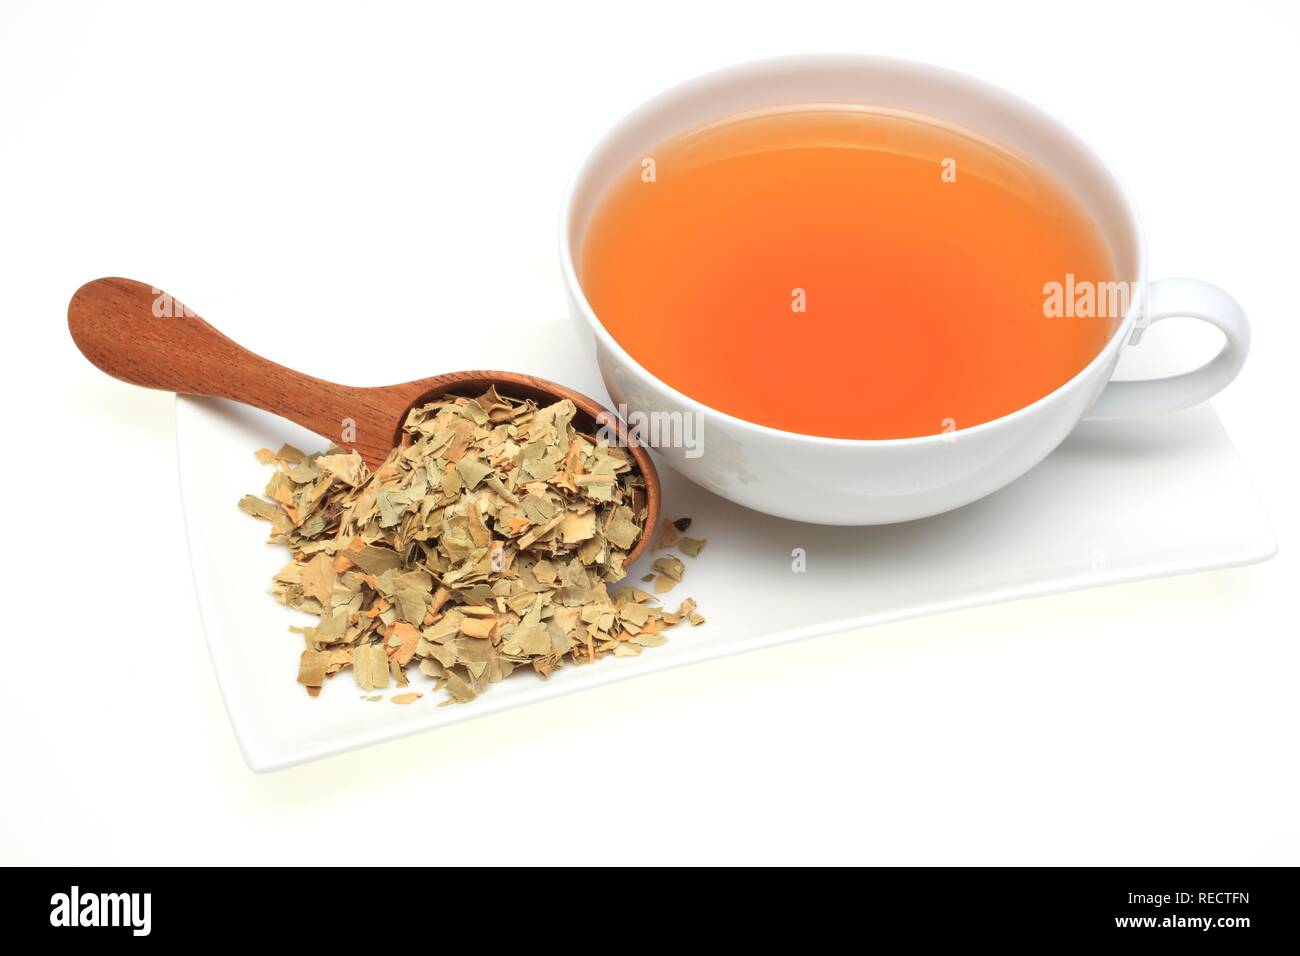 Herbal tea made of dried leaves of the bitter orange, used als herbal medicine and scent (Citrus aurantium) Stock Photo